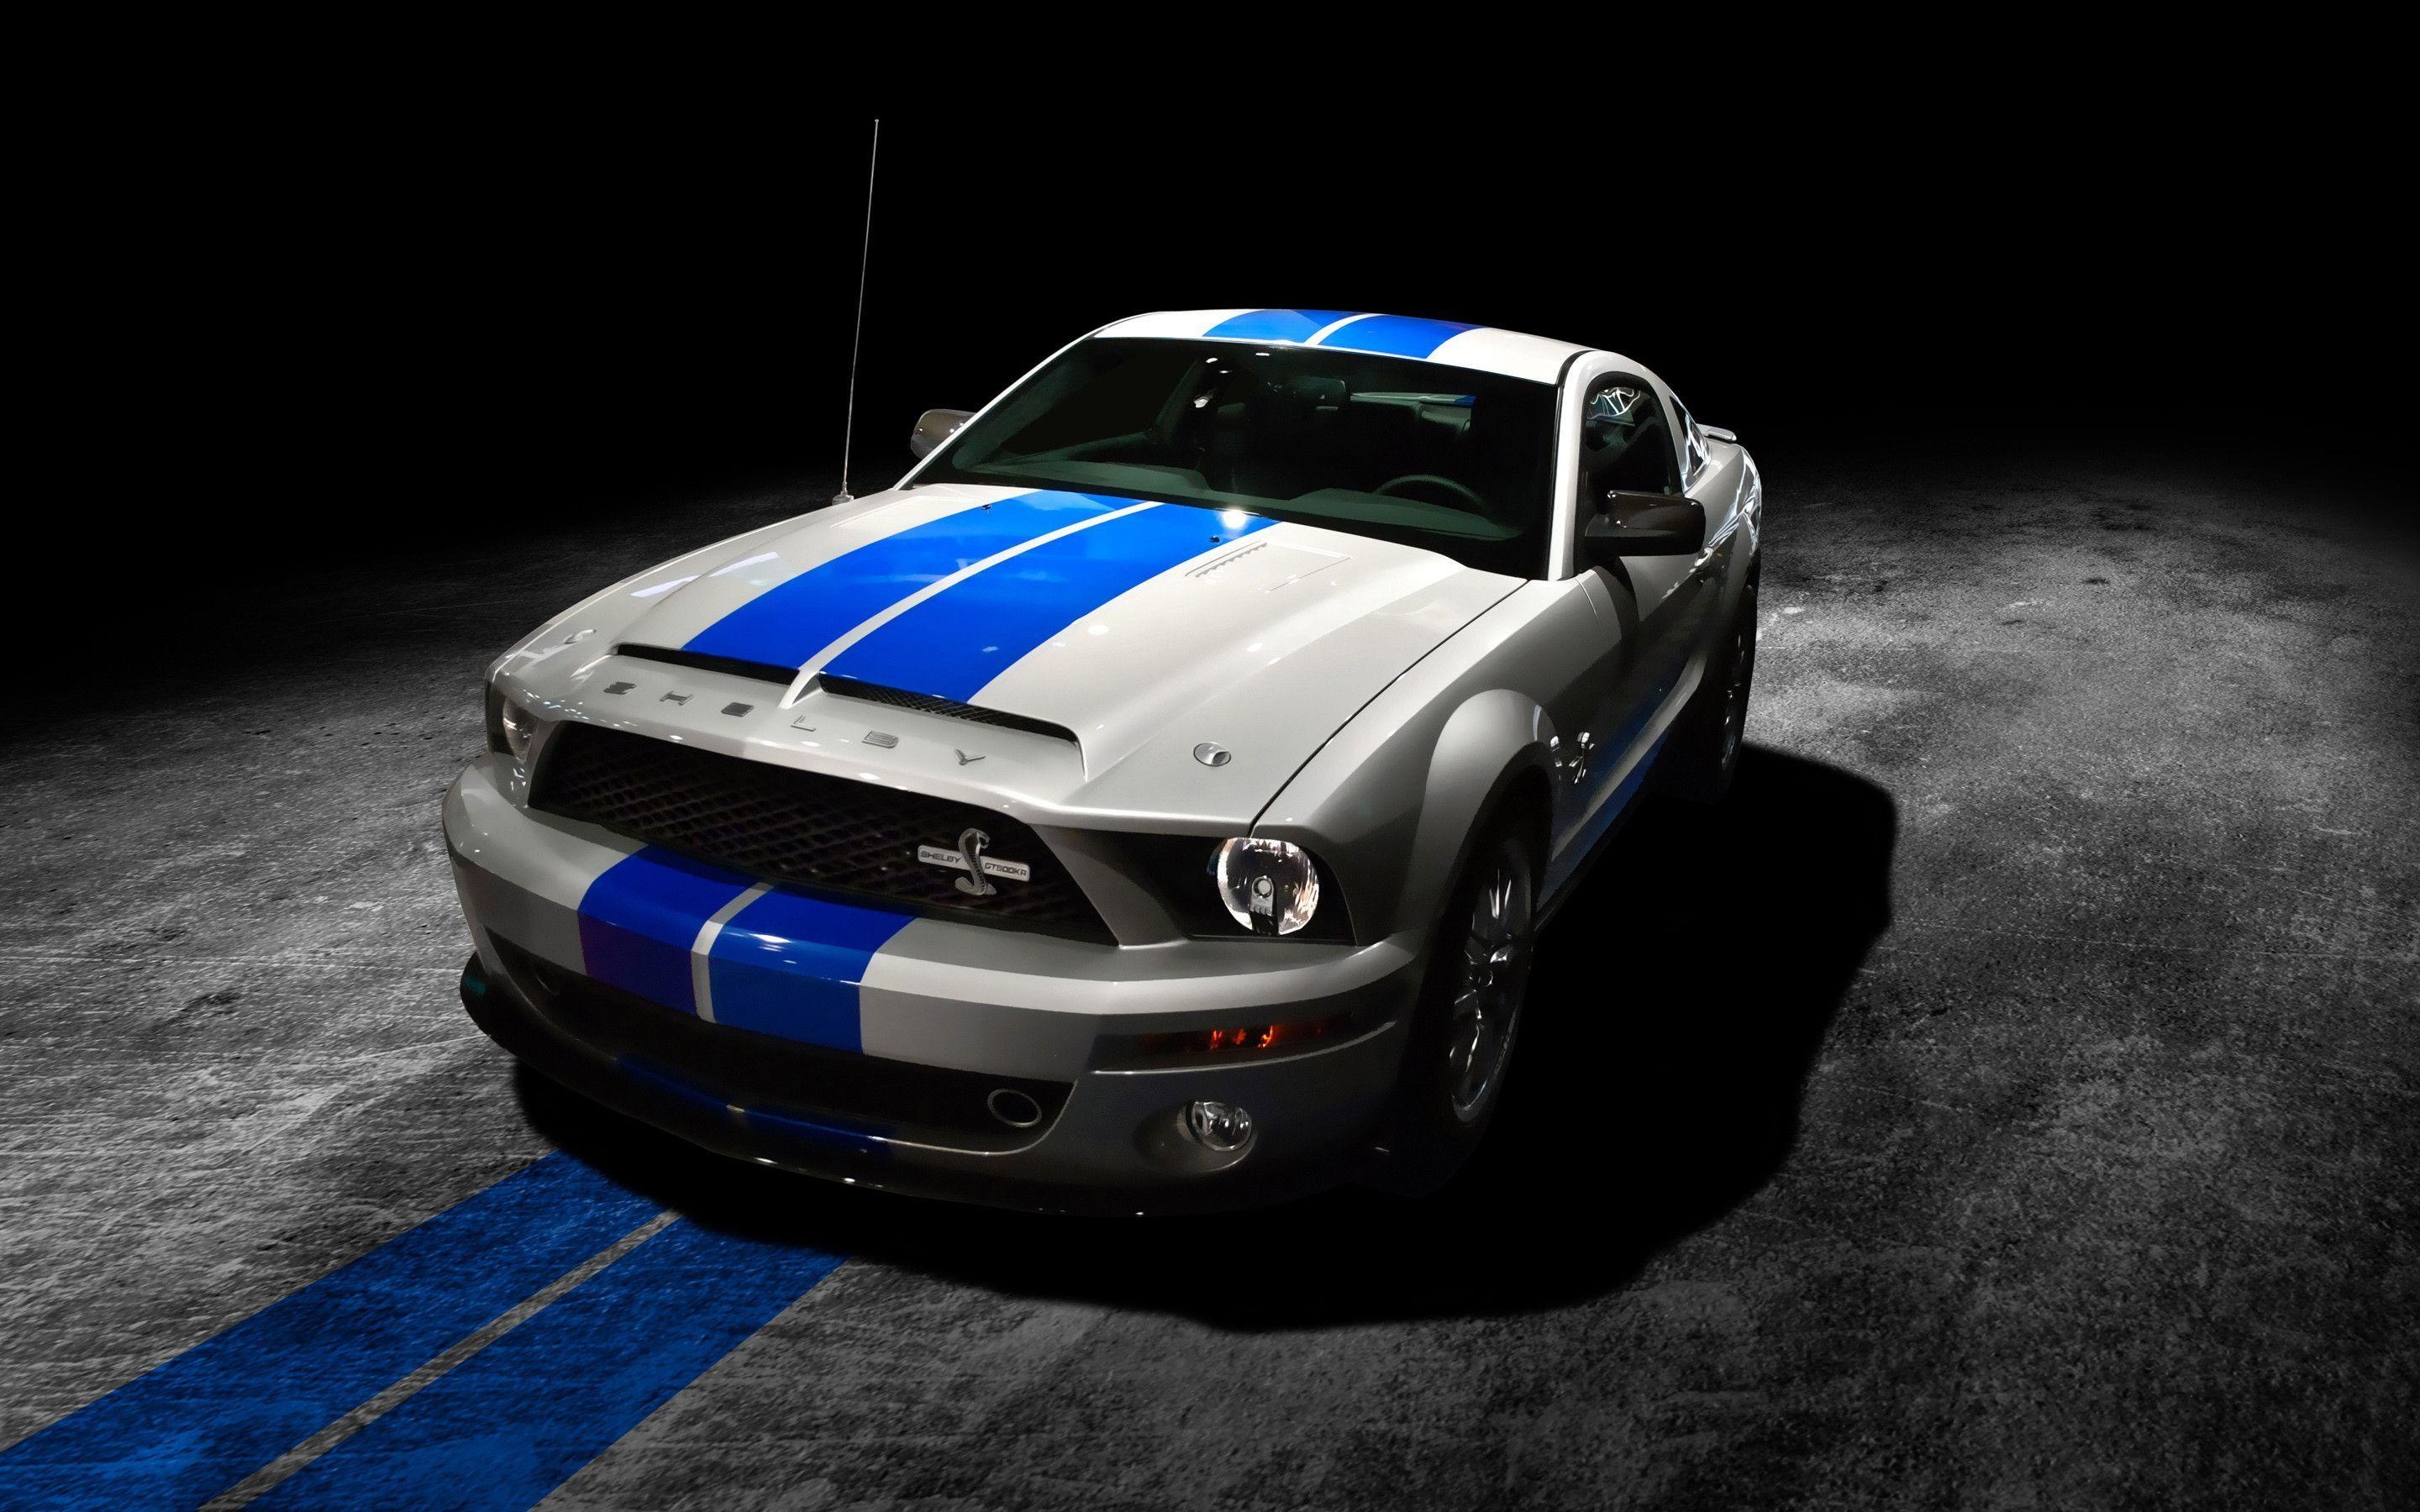 Ford Mustang, Pony car heritage, Power and style, Driving passion, American car culture, 2880x1800 HD Desktop